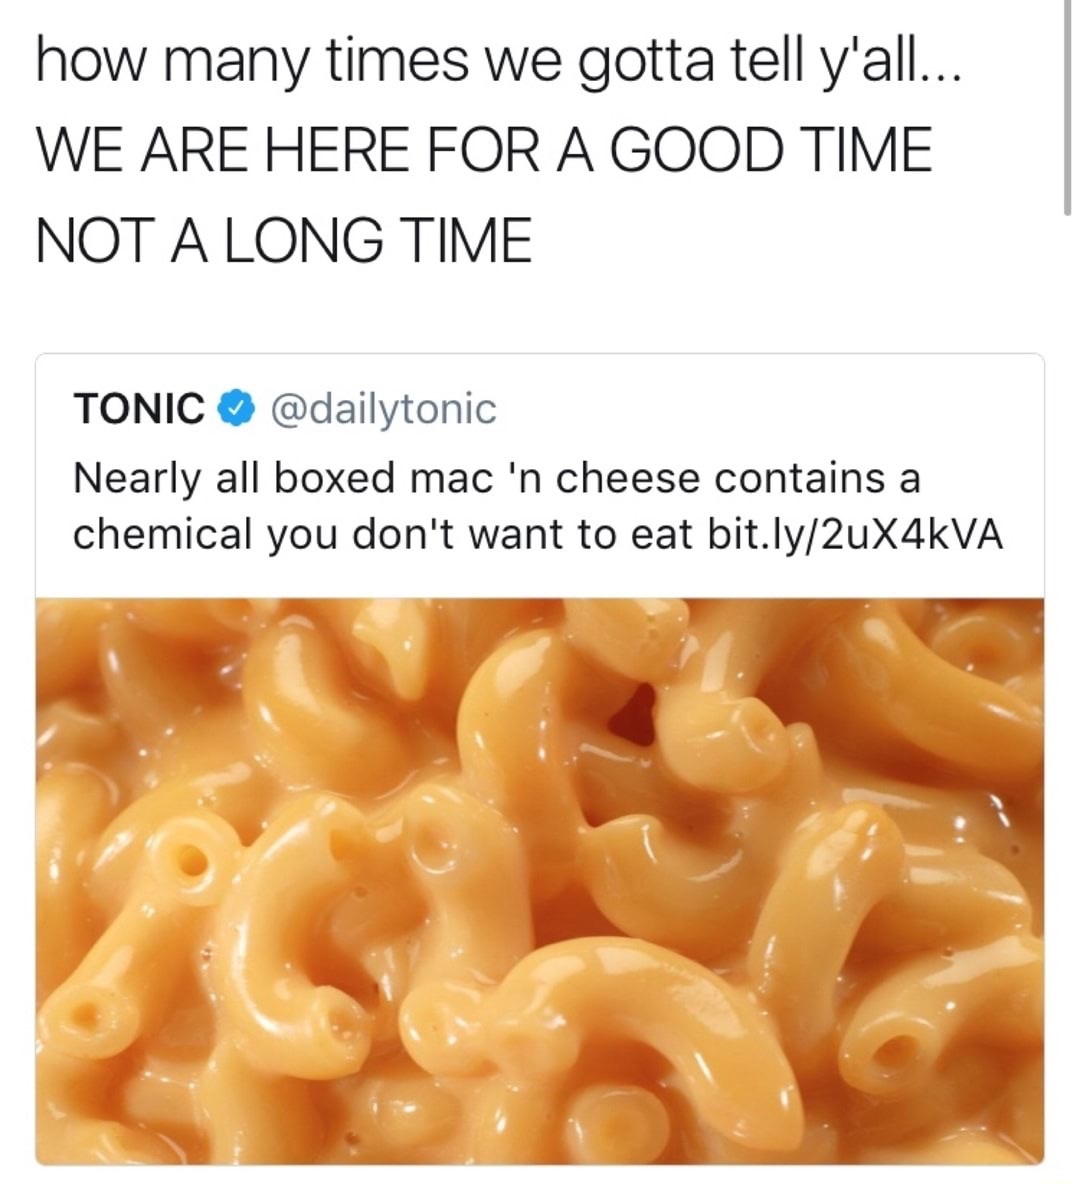 Tweet about Chemical in Mac and Cheese